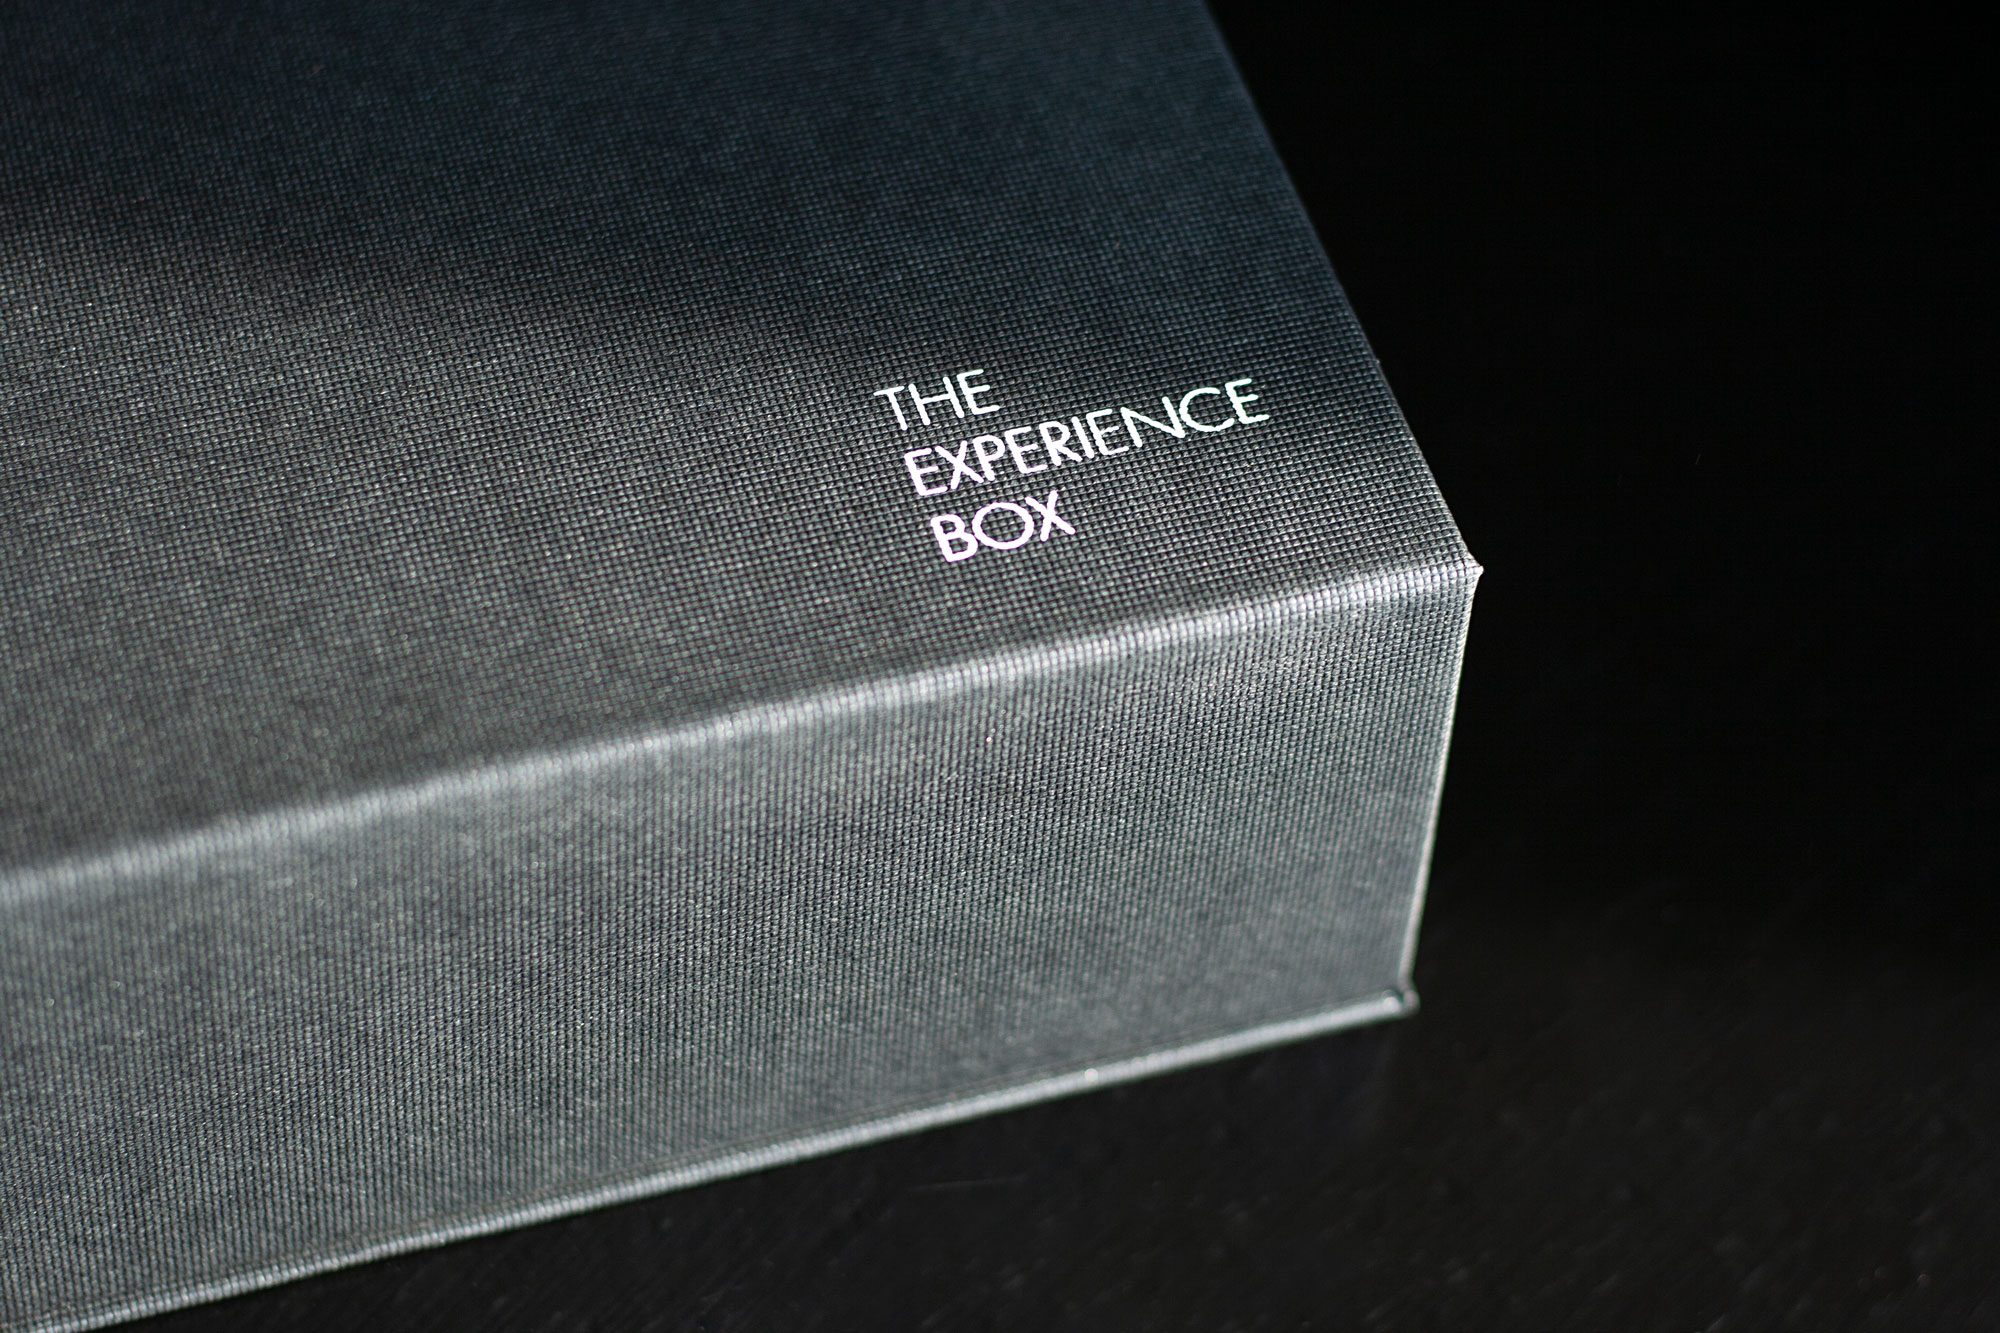 The Experience Box